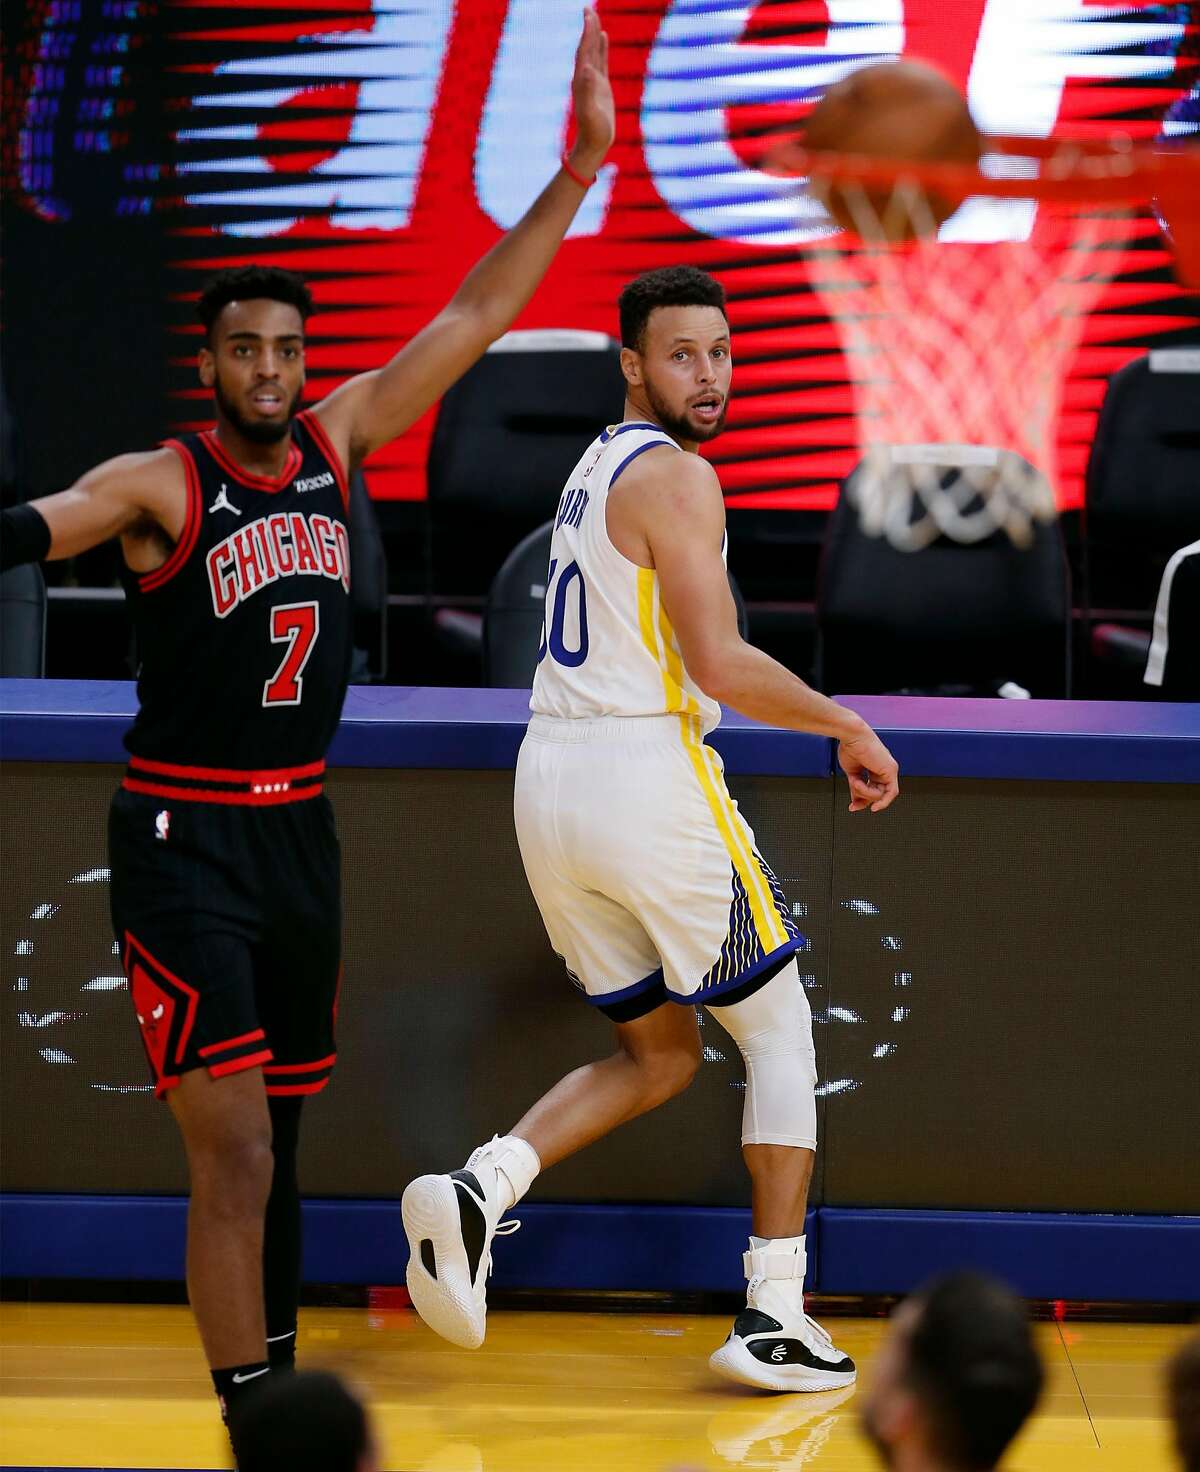 Curry and Chicago’s Troy Brown Jr. watch the Warrior’s 3-pointer go in at Chase Center in San Francisco.during 2nd quarter of NBA game at Chase Center in San Francisco, Calif., on Monday, March 29, 2021,